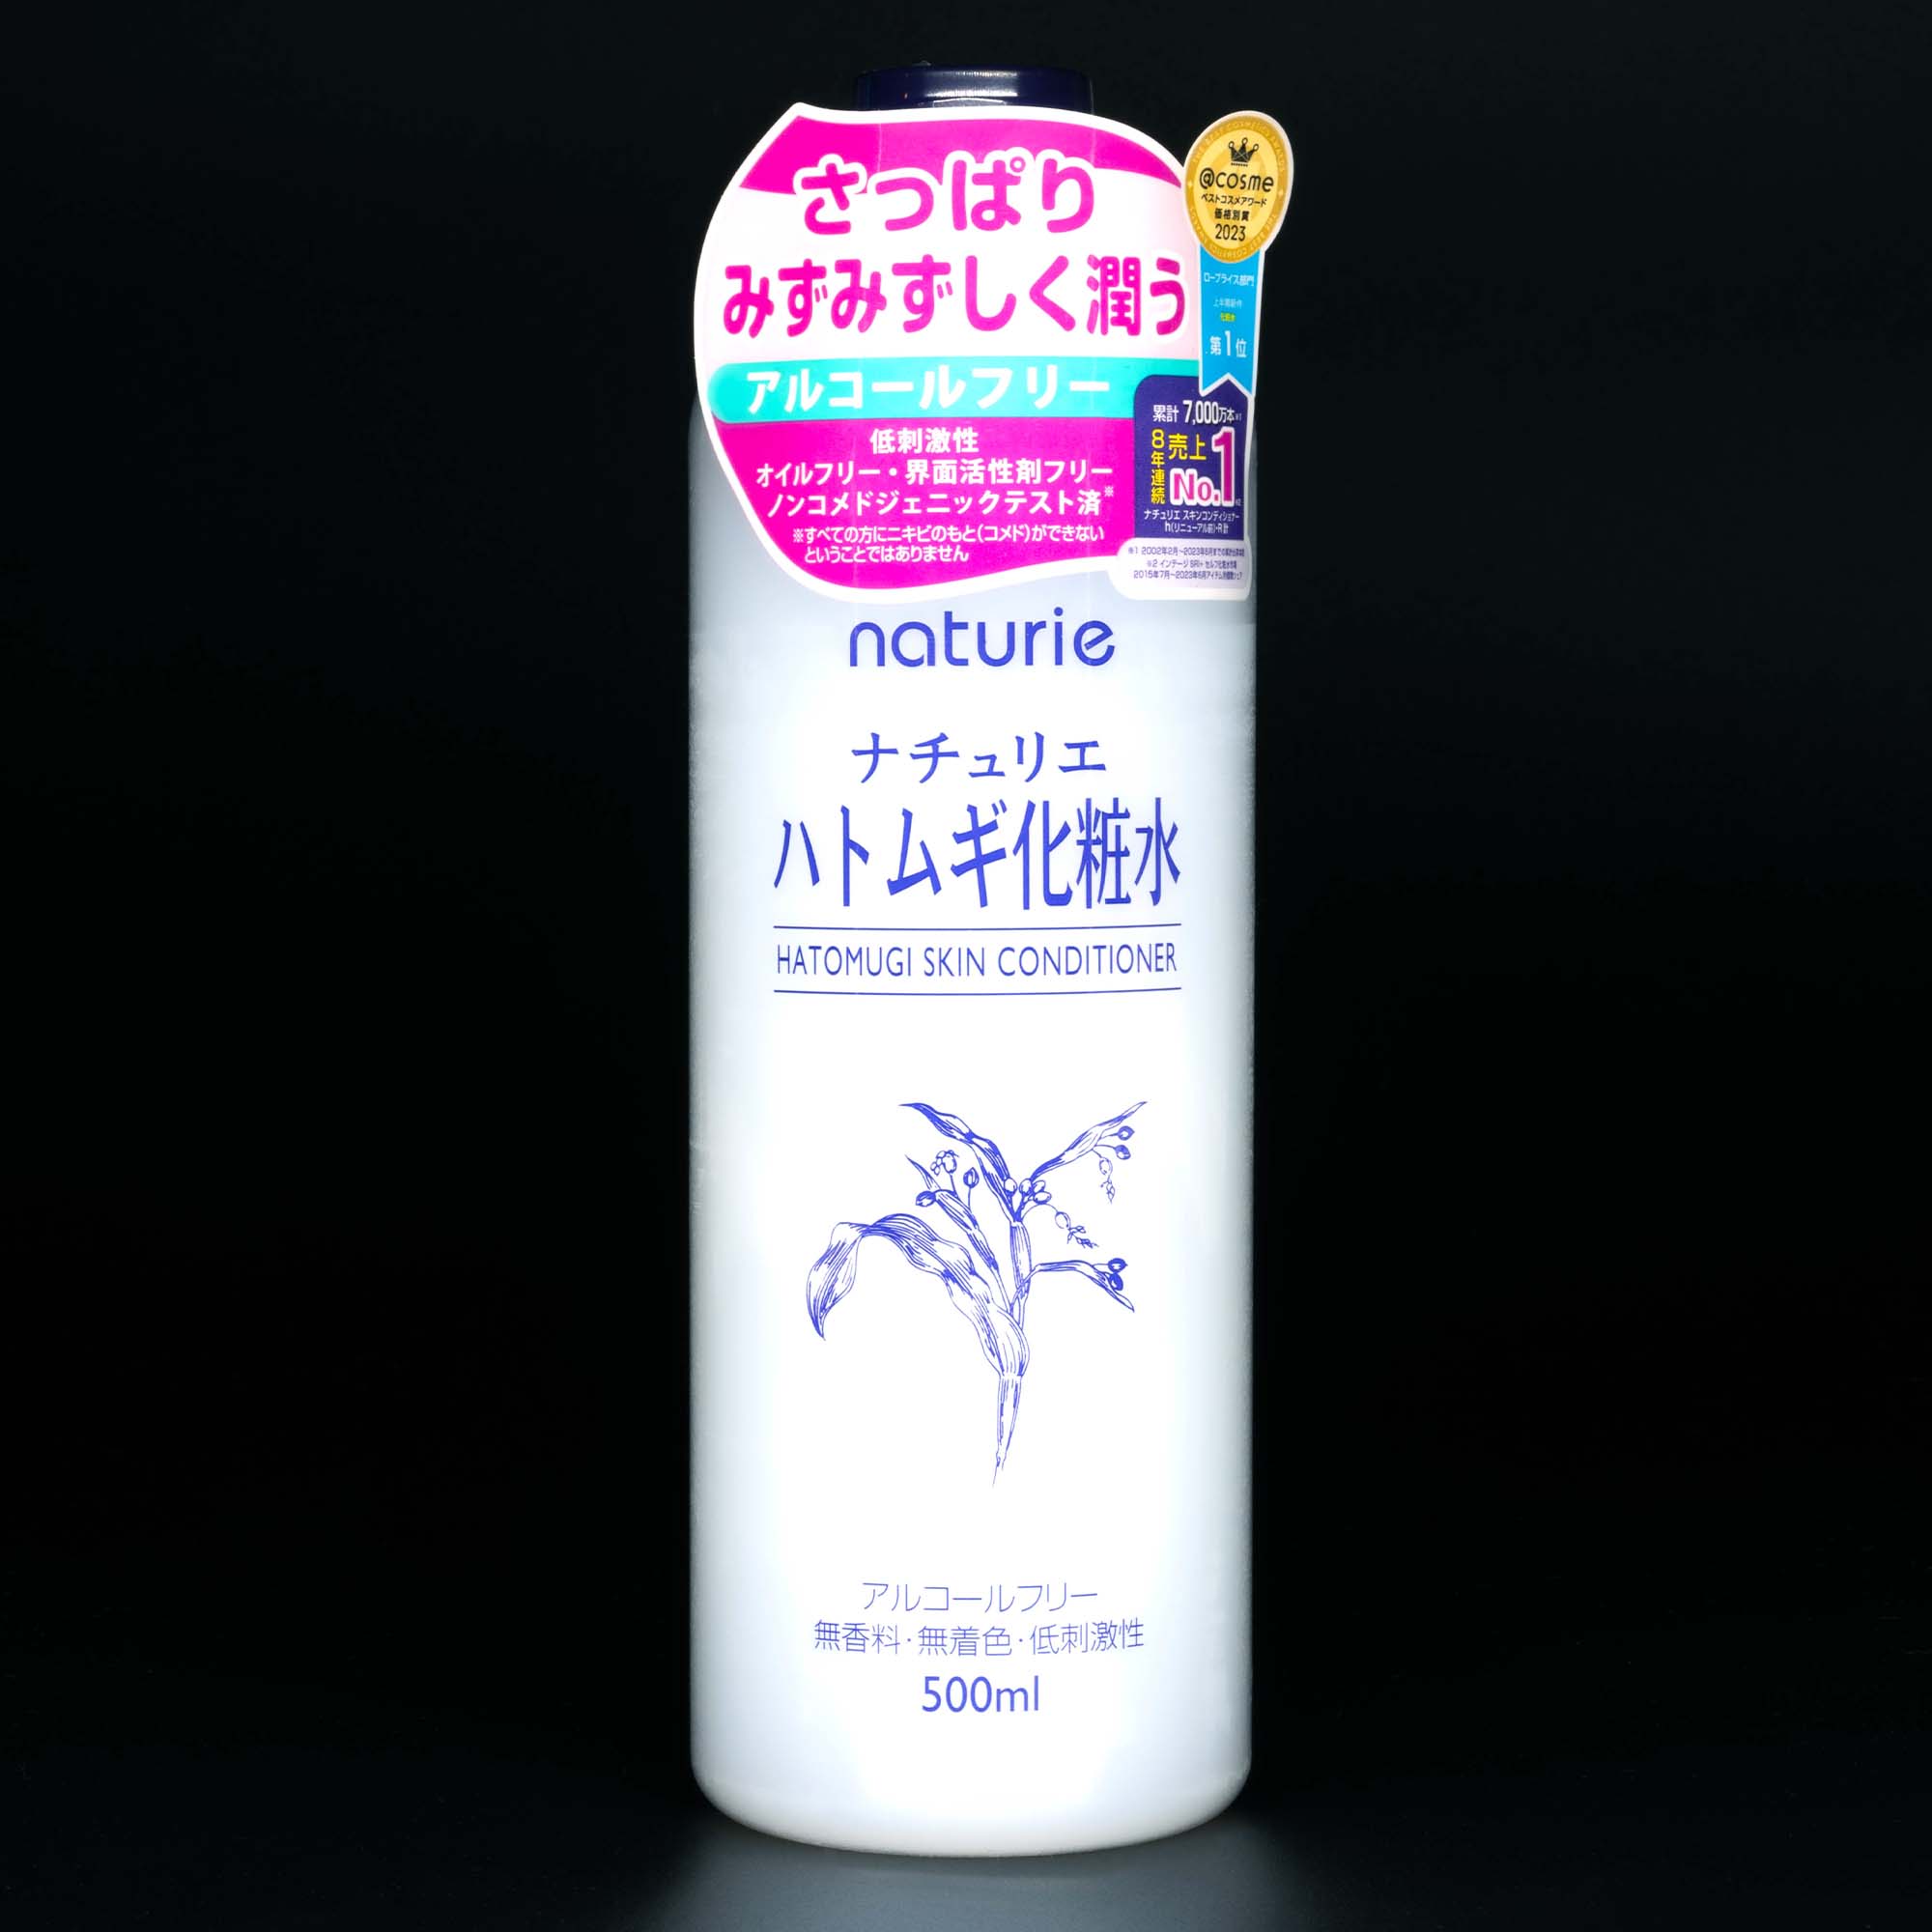 An Image of Naturie Hatomugi Skin Conditioners New Full 2024 Container and Packaging